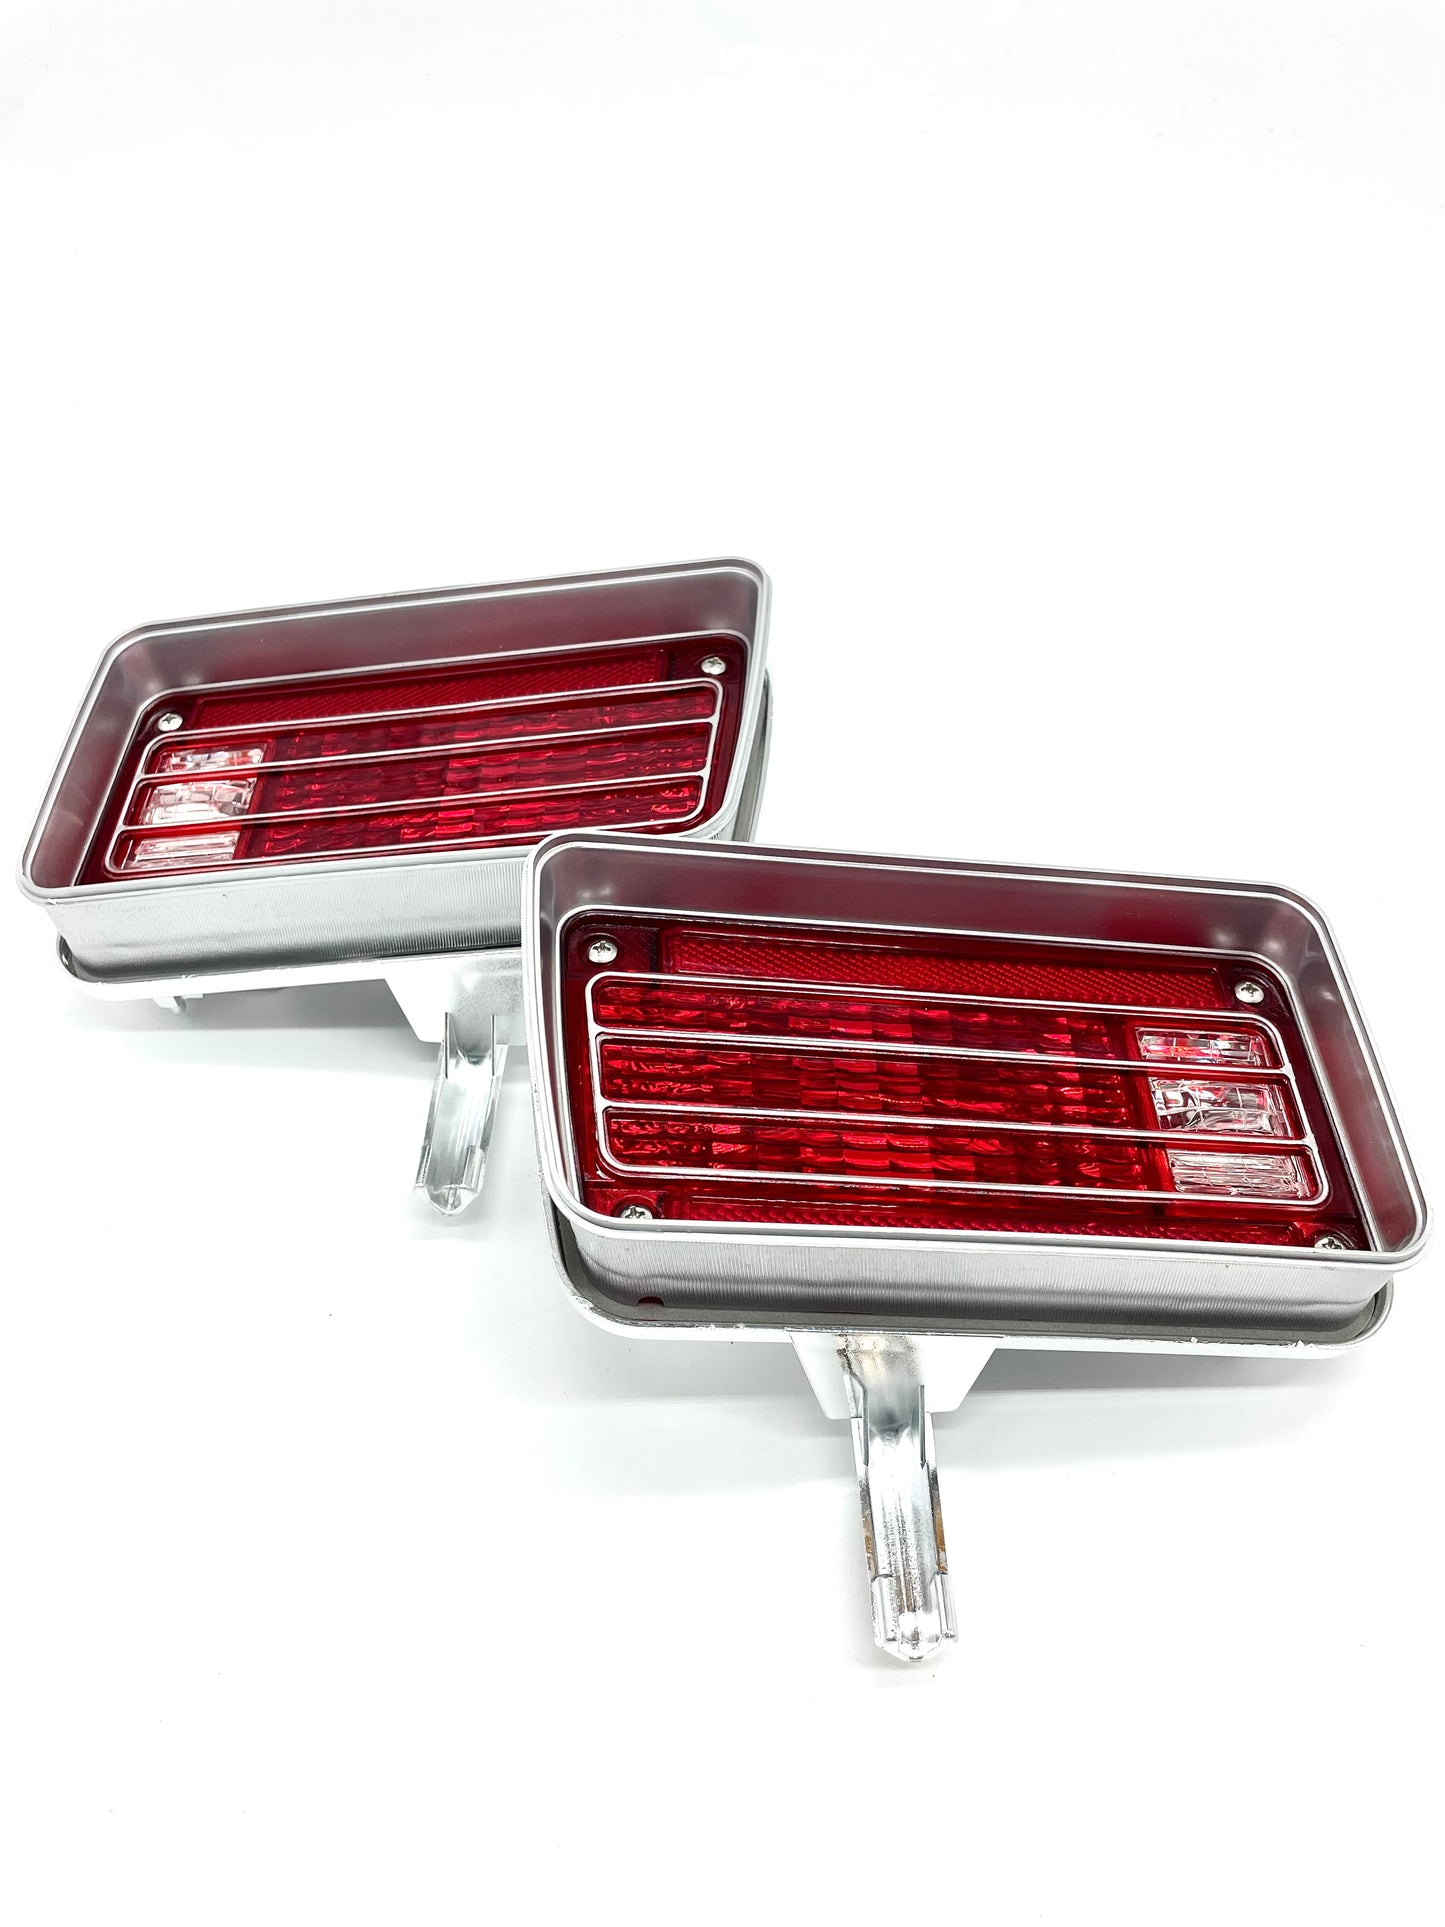 1970 Chevelle Taillight Assembly, Sold in pairs